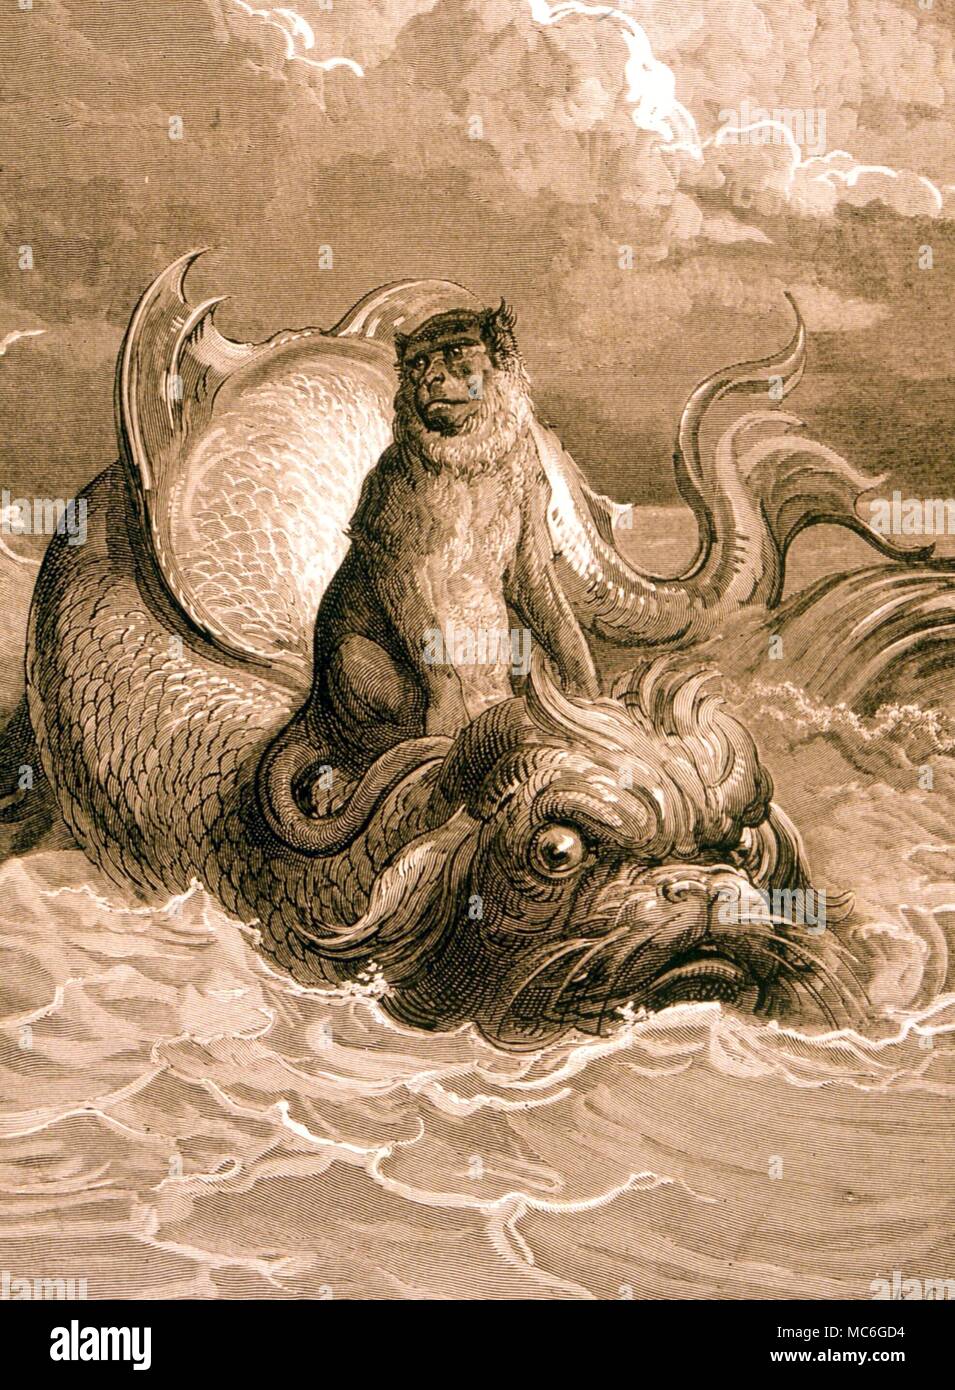 ANIMALS Monkey and dolphin. The monkey rescued from a shipwreck by a dolphin - from the story by La Fontaine. Engraving after Gustav Dore Stock Photo